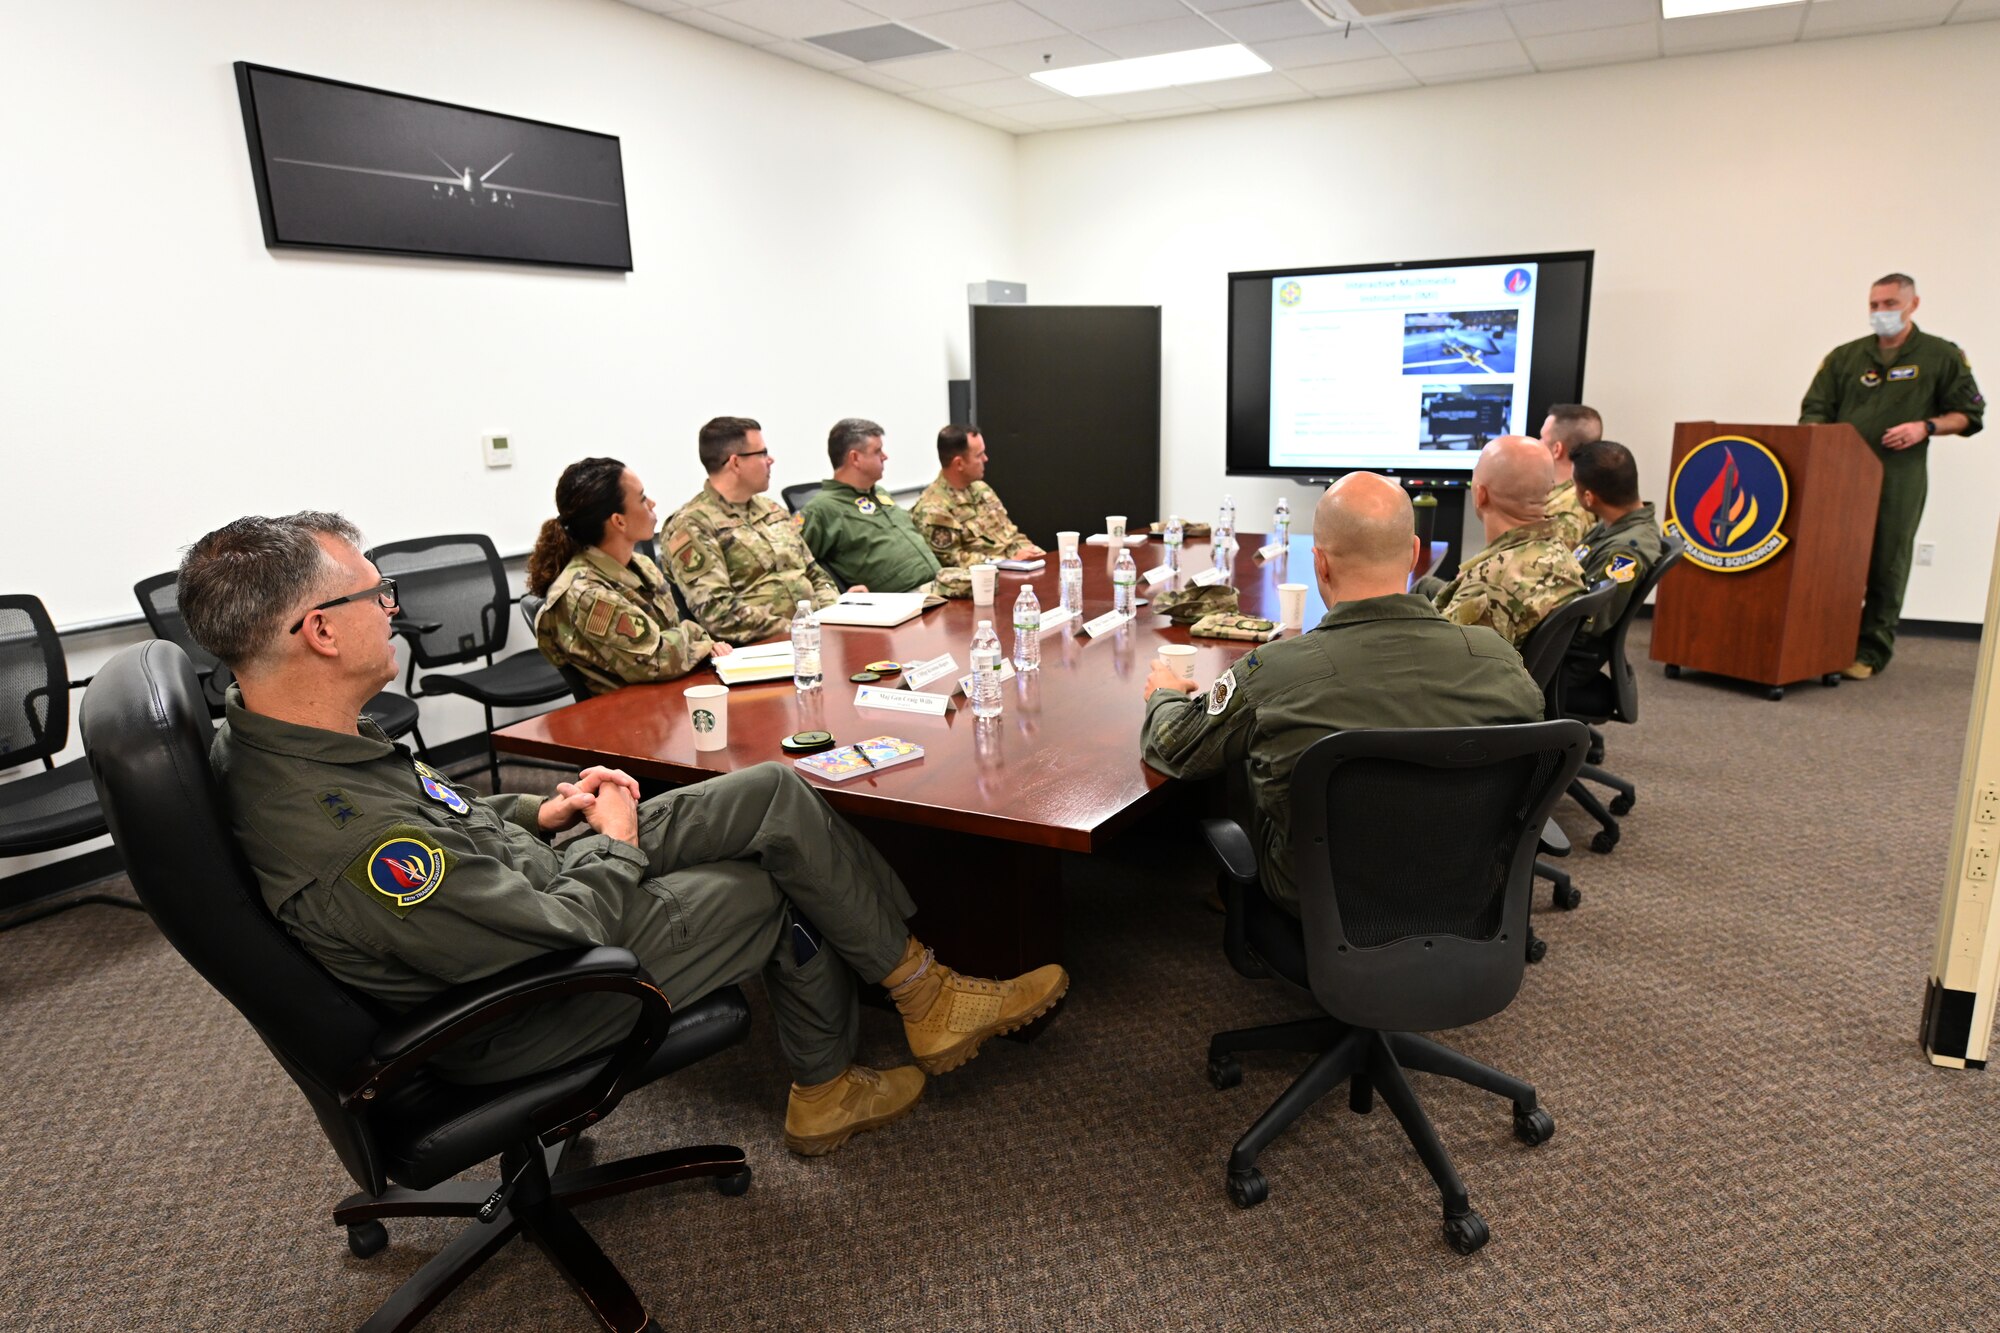 Maj. Gen. Craig D. Wills, 19th Air Force commander, listens to a 16th Training Squadron mission brief July 20, 2021, on Holloman Air Force Base, N.M. The command team held three all calls and discussed the future of the MQ-9 Reaper enterprise. (U.S. Air Force photo by Staff Sgt. Christopher S. Sparks)